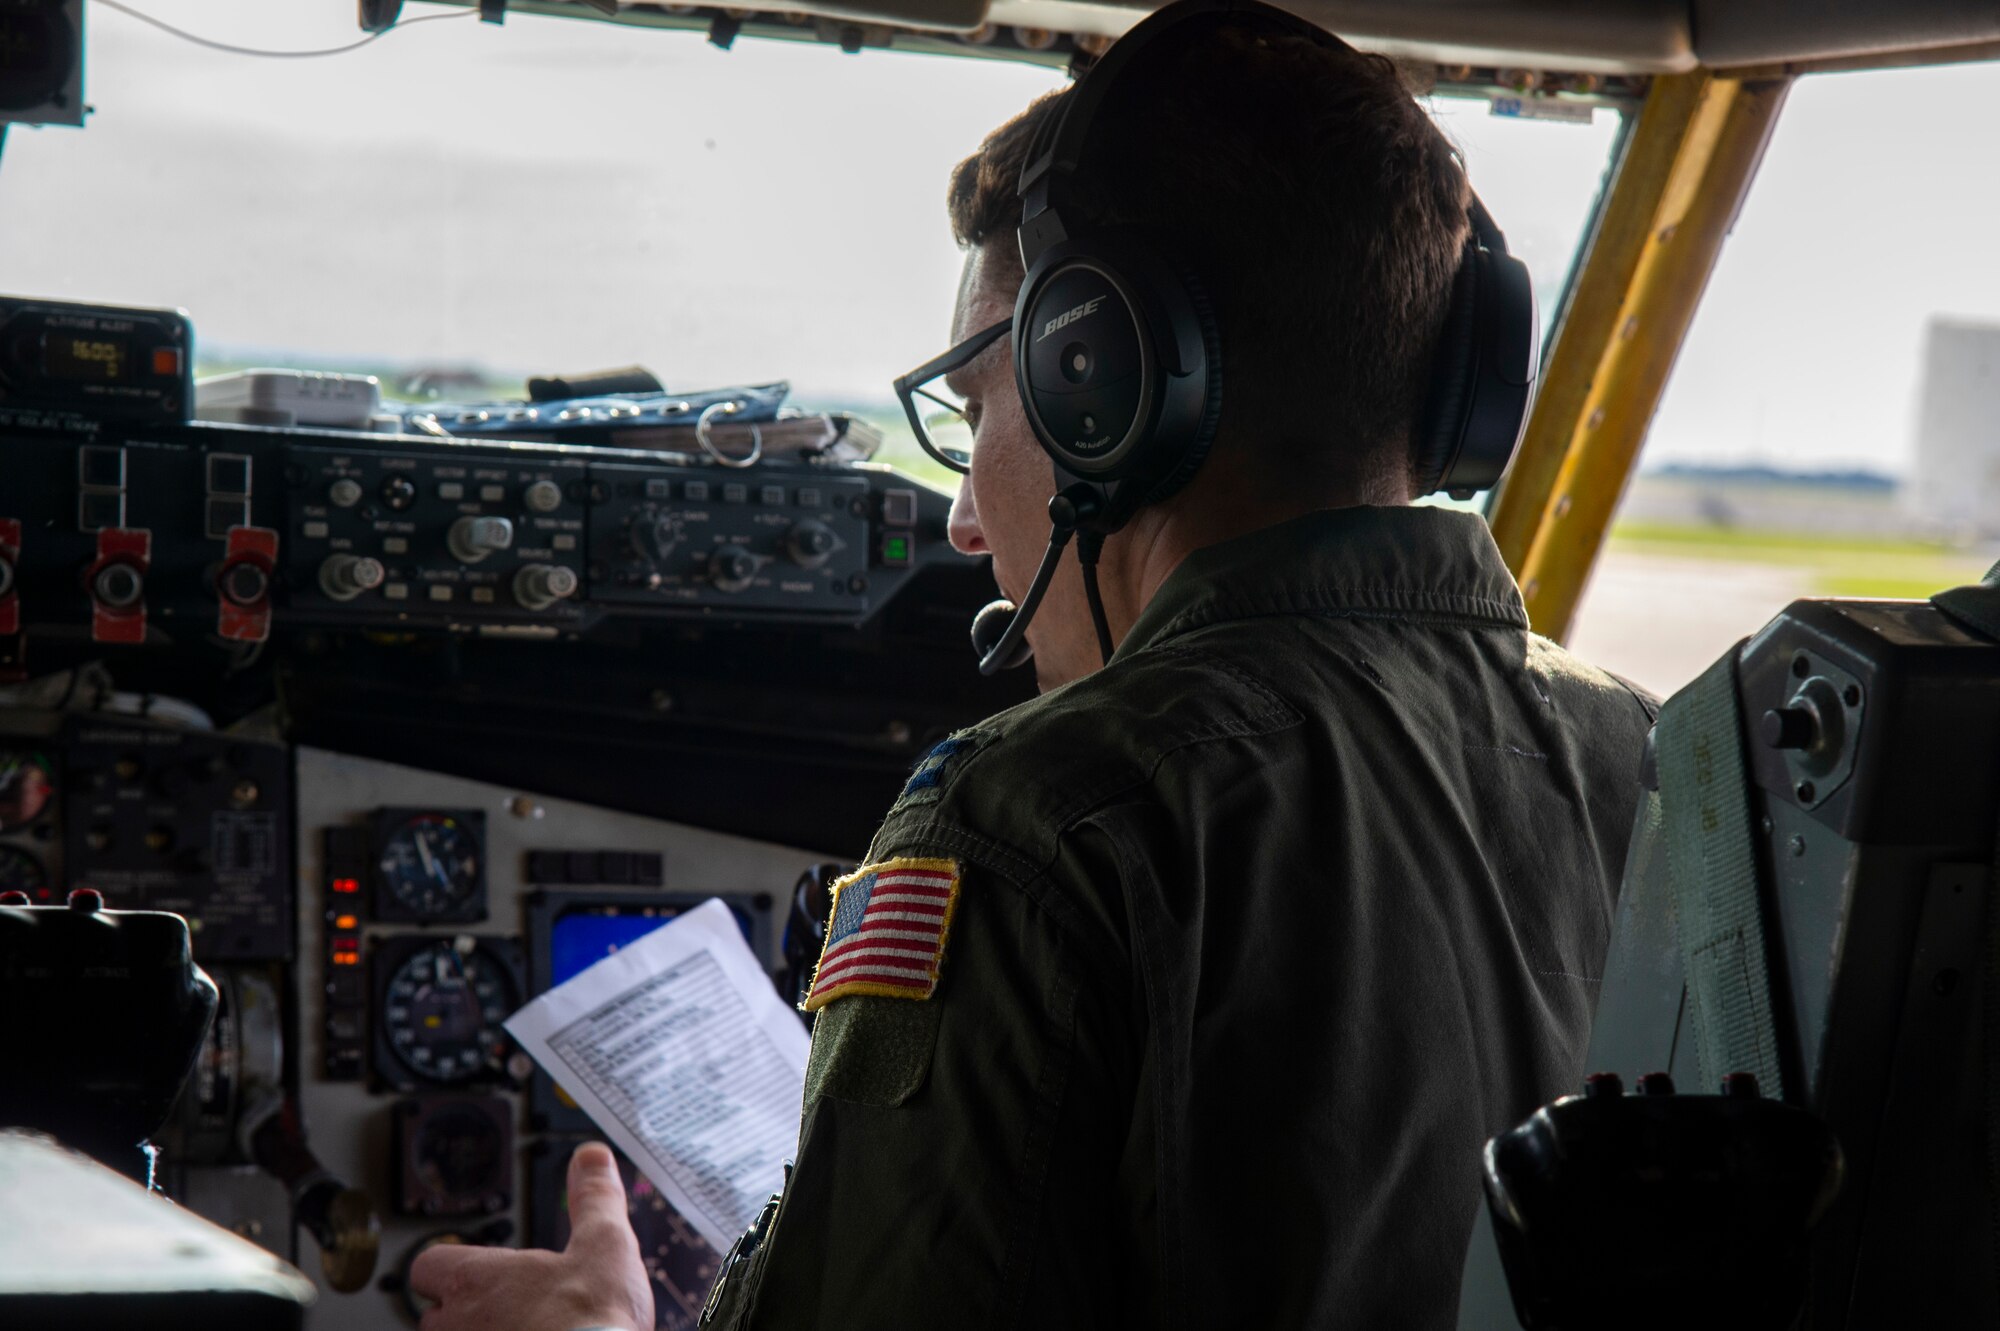 U.S. Air Force Capt. Richard Hall, a pilot assigned to the 91st Air Refueling Squadron, reviews a checklist prior to takeoff from MacDill Air Force Base, Fla., Sept. 30, 2020.